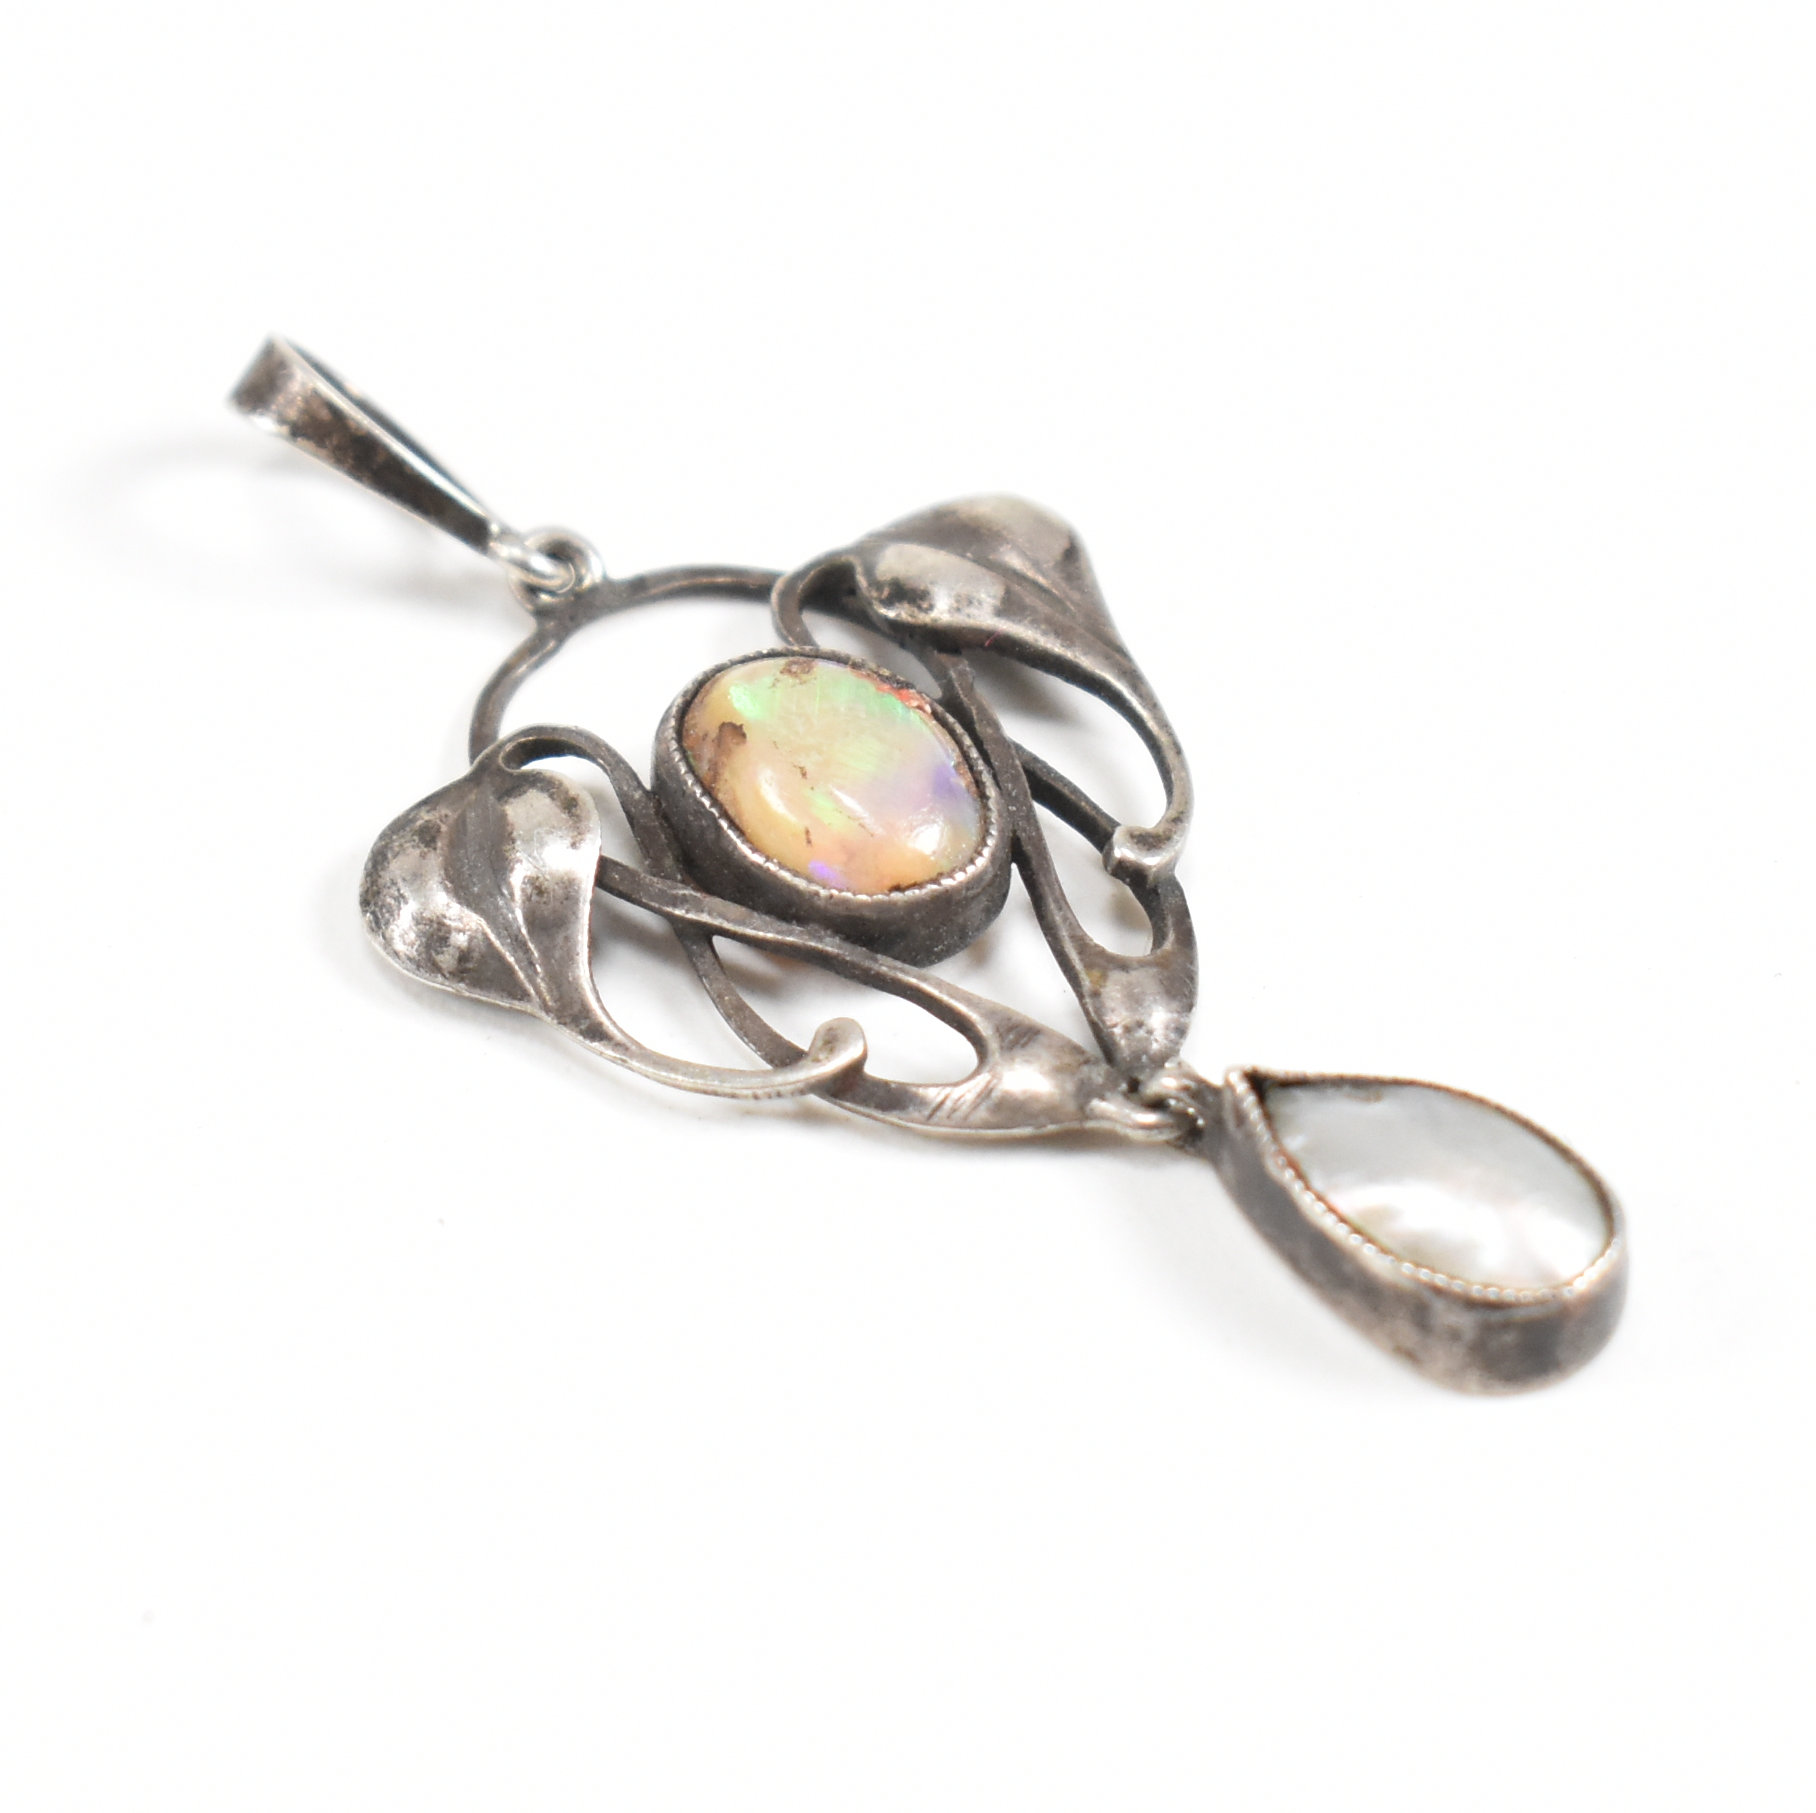 ARTS & CRAFTS SILVER OPAL & MOTHER OF PEARL NECKLACE PENDANT - Image 4 of 6